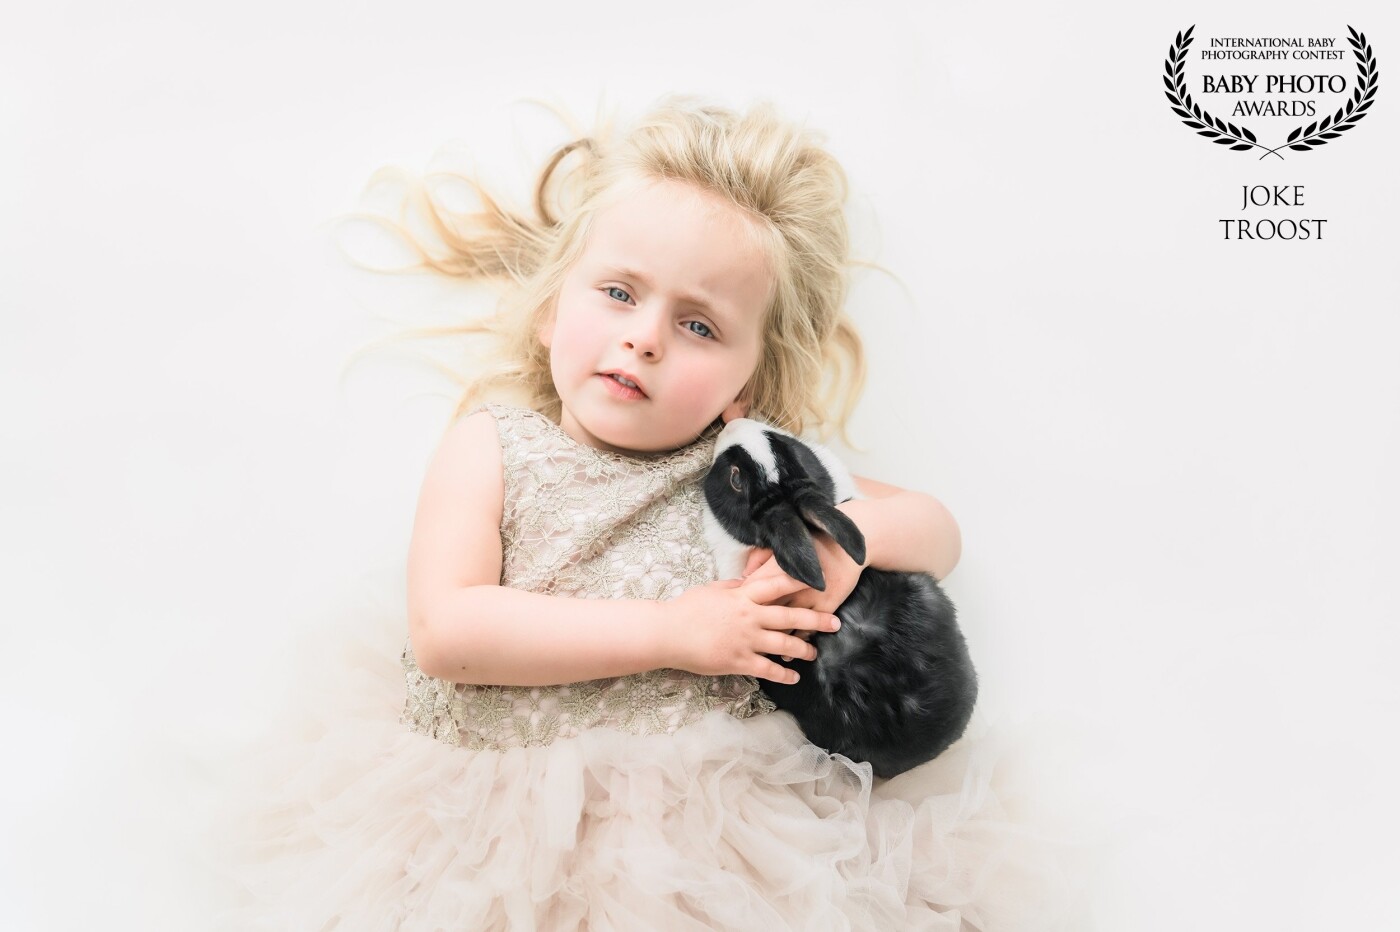 This sweet little girl is my own little girl called Benthe (3 years old) and her rabbit called Pretzel. Benthe loves to be my model and with her beautiful blue eyes and curious looks, it is always a pleasure to photograph her. I'm particularly happy that this picture was chosen because it is clean, simple, and light.